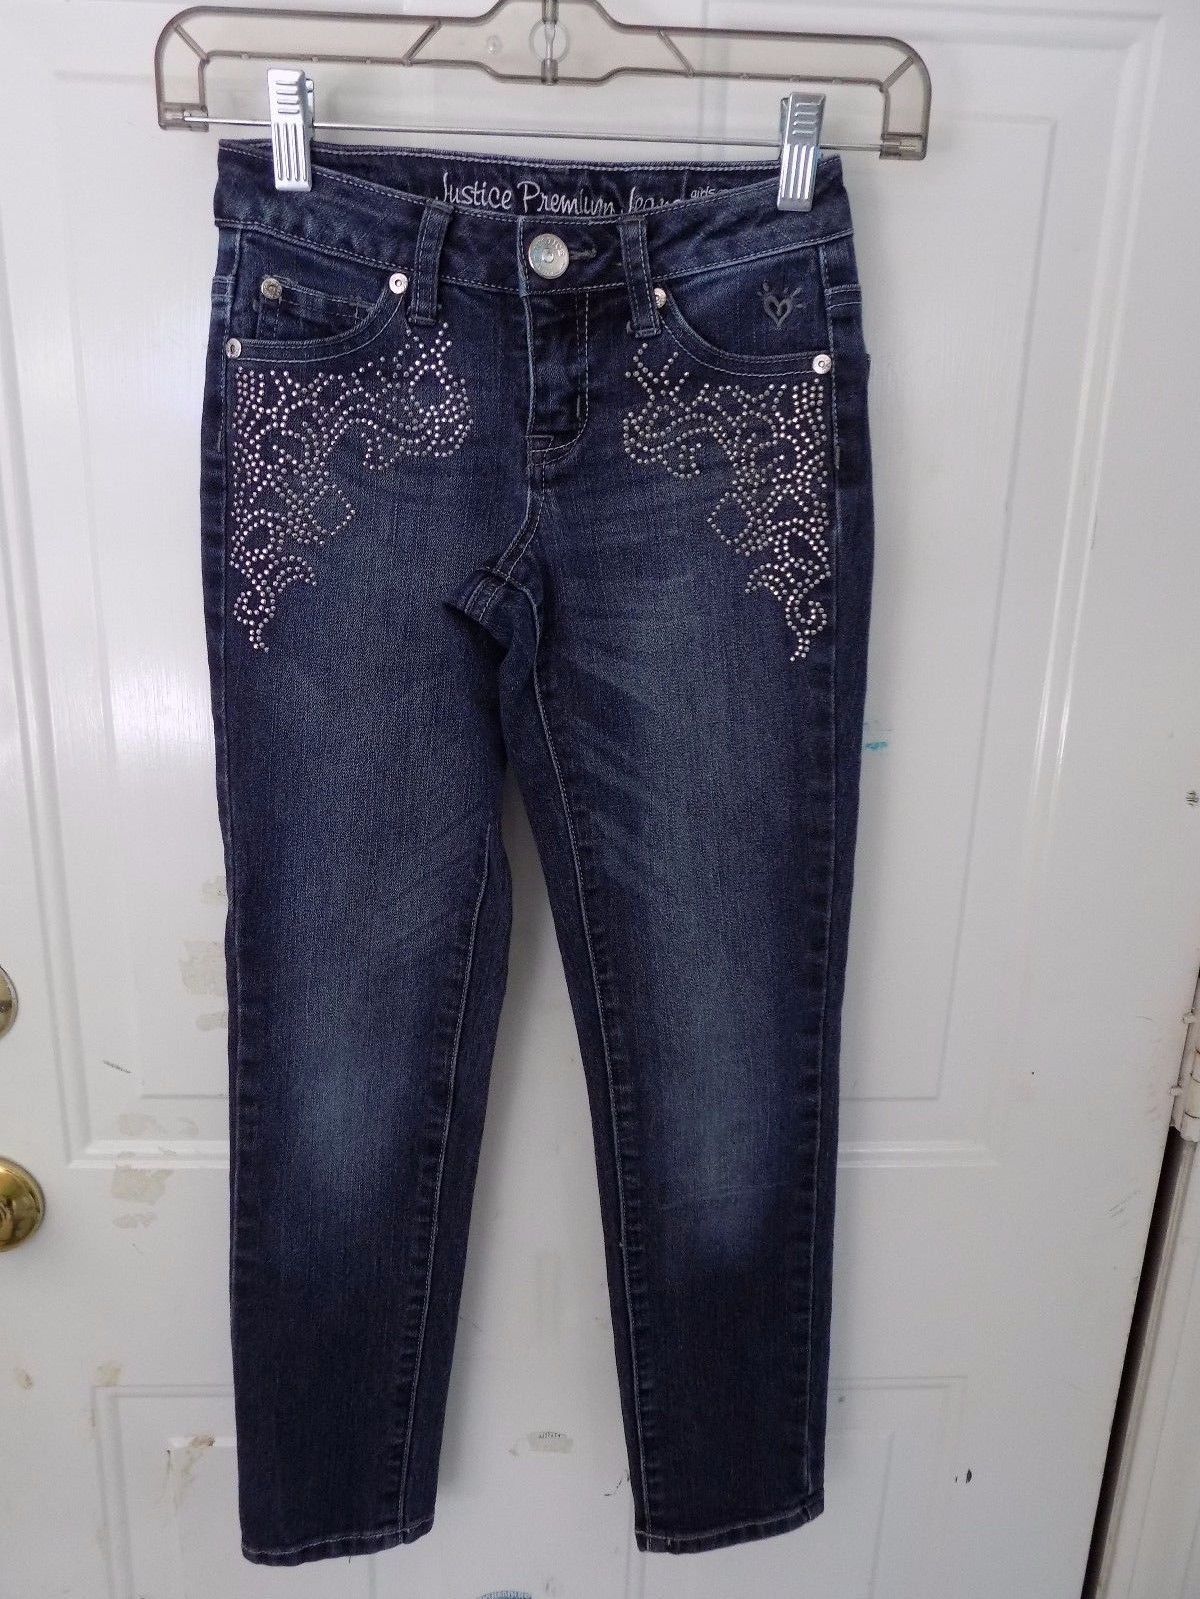 JUSTICE PREMIUM SIMPLY LOW STRAIGHT LEG JEANS SIZE 8R GIRL'S EUC - $21.60